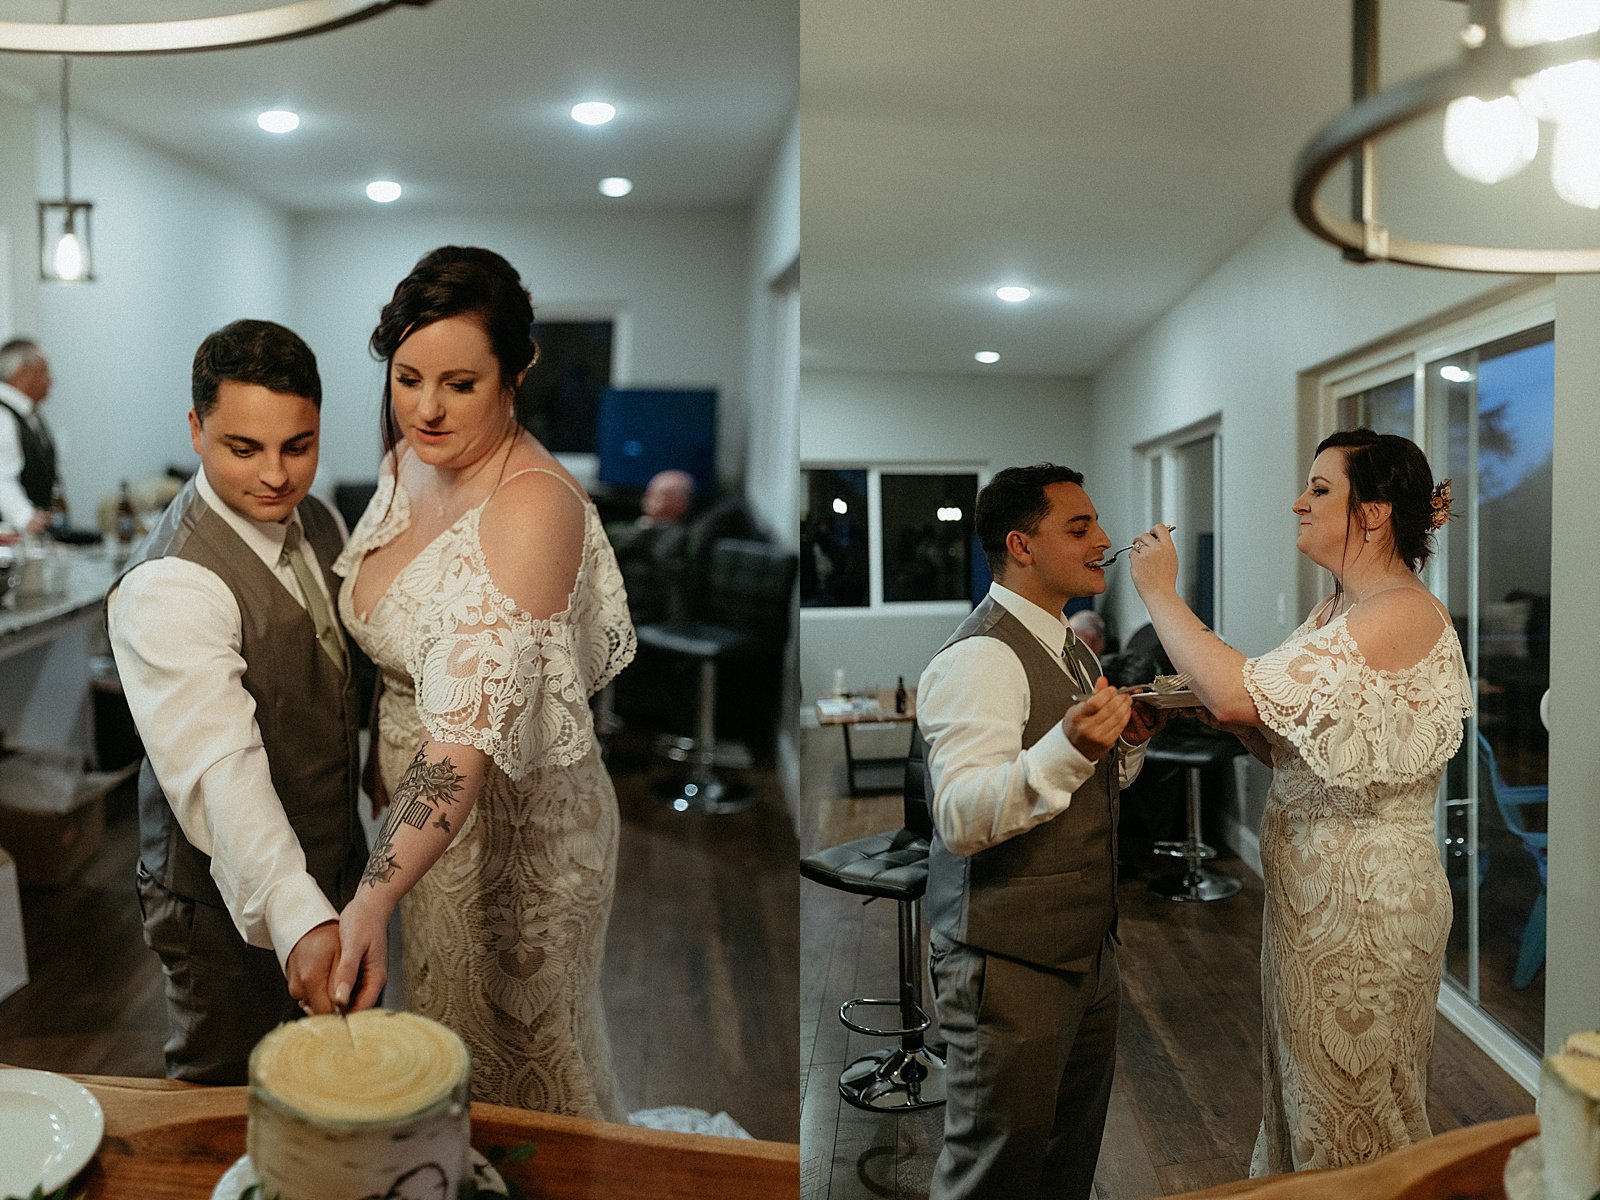  Newlyweds cutting the cake with their family and friends at an Airbnb for Girdwood Elopement 